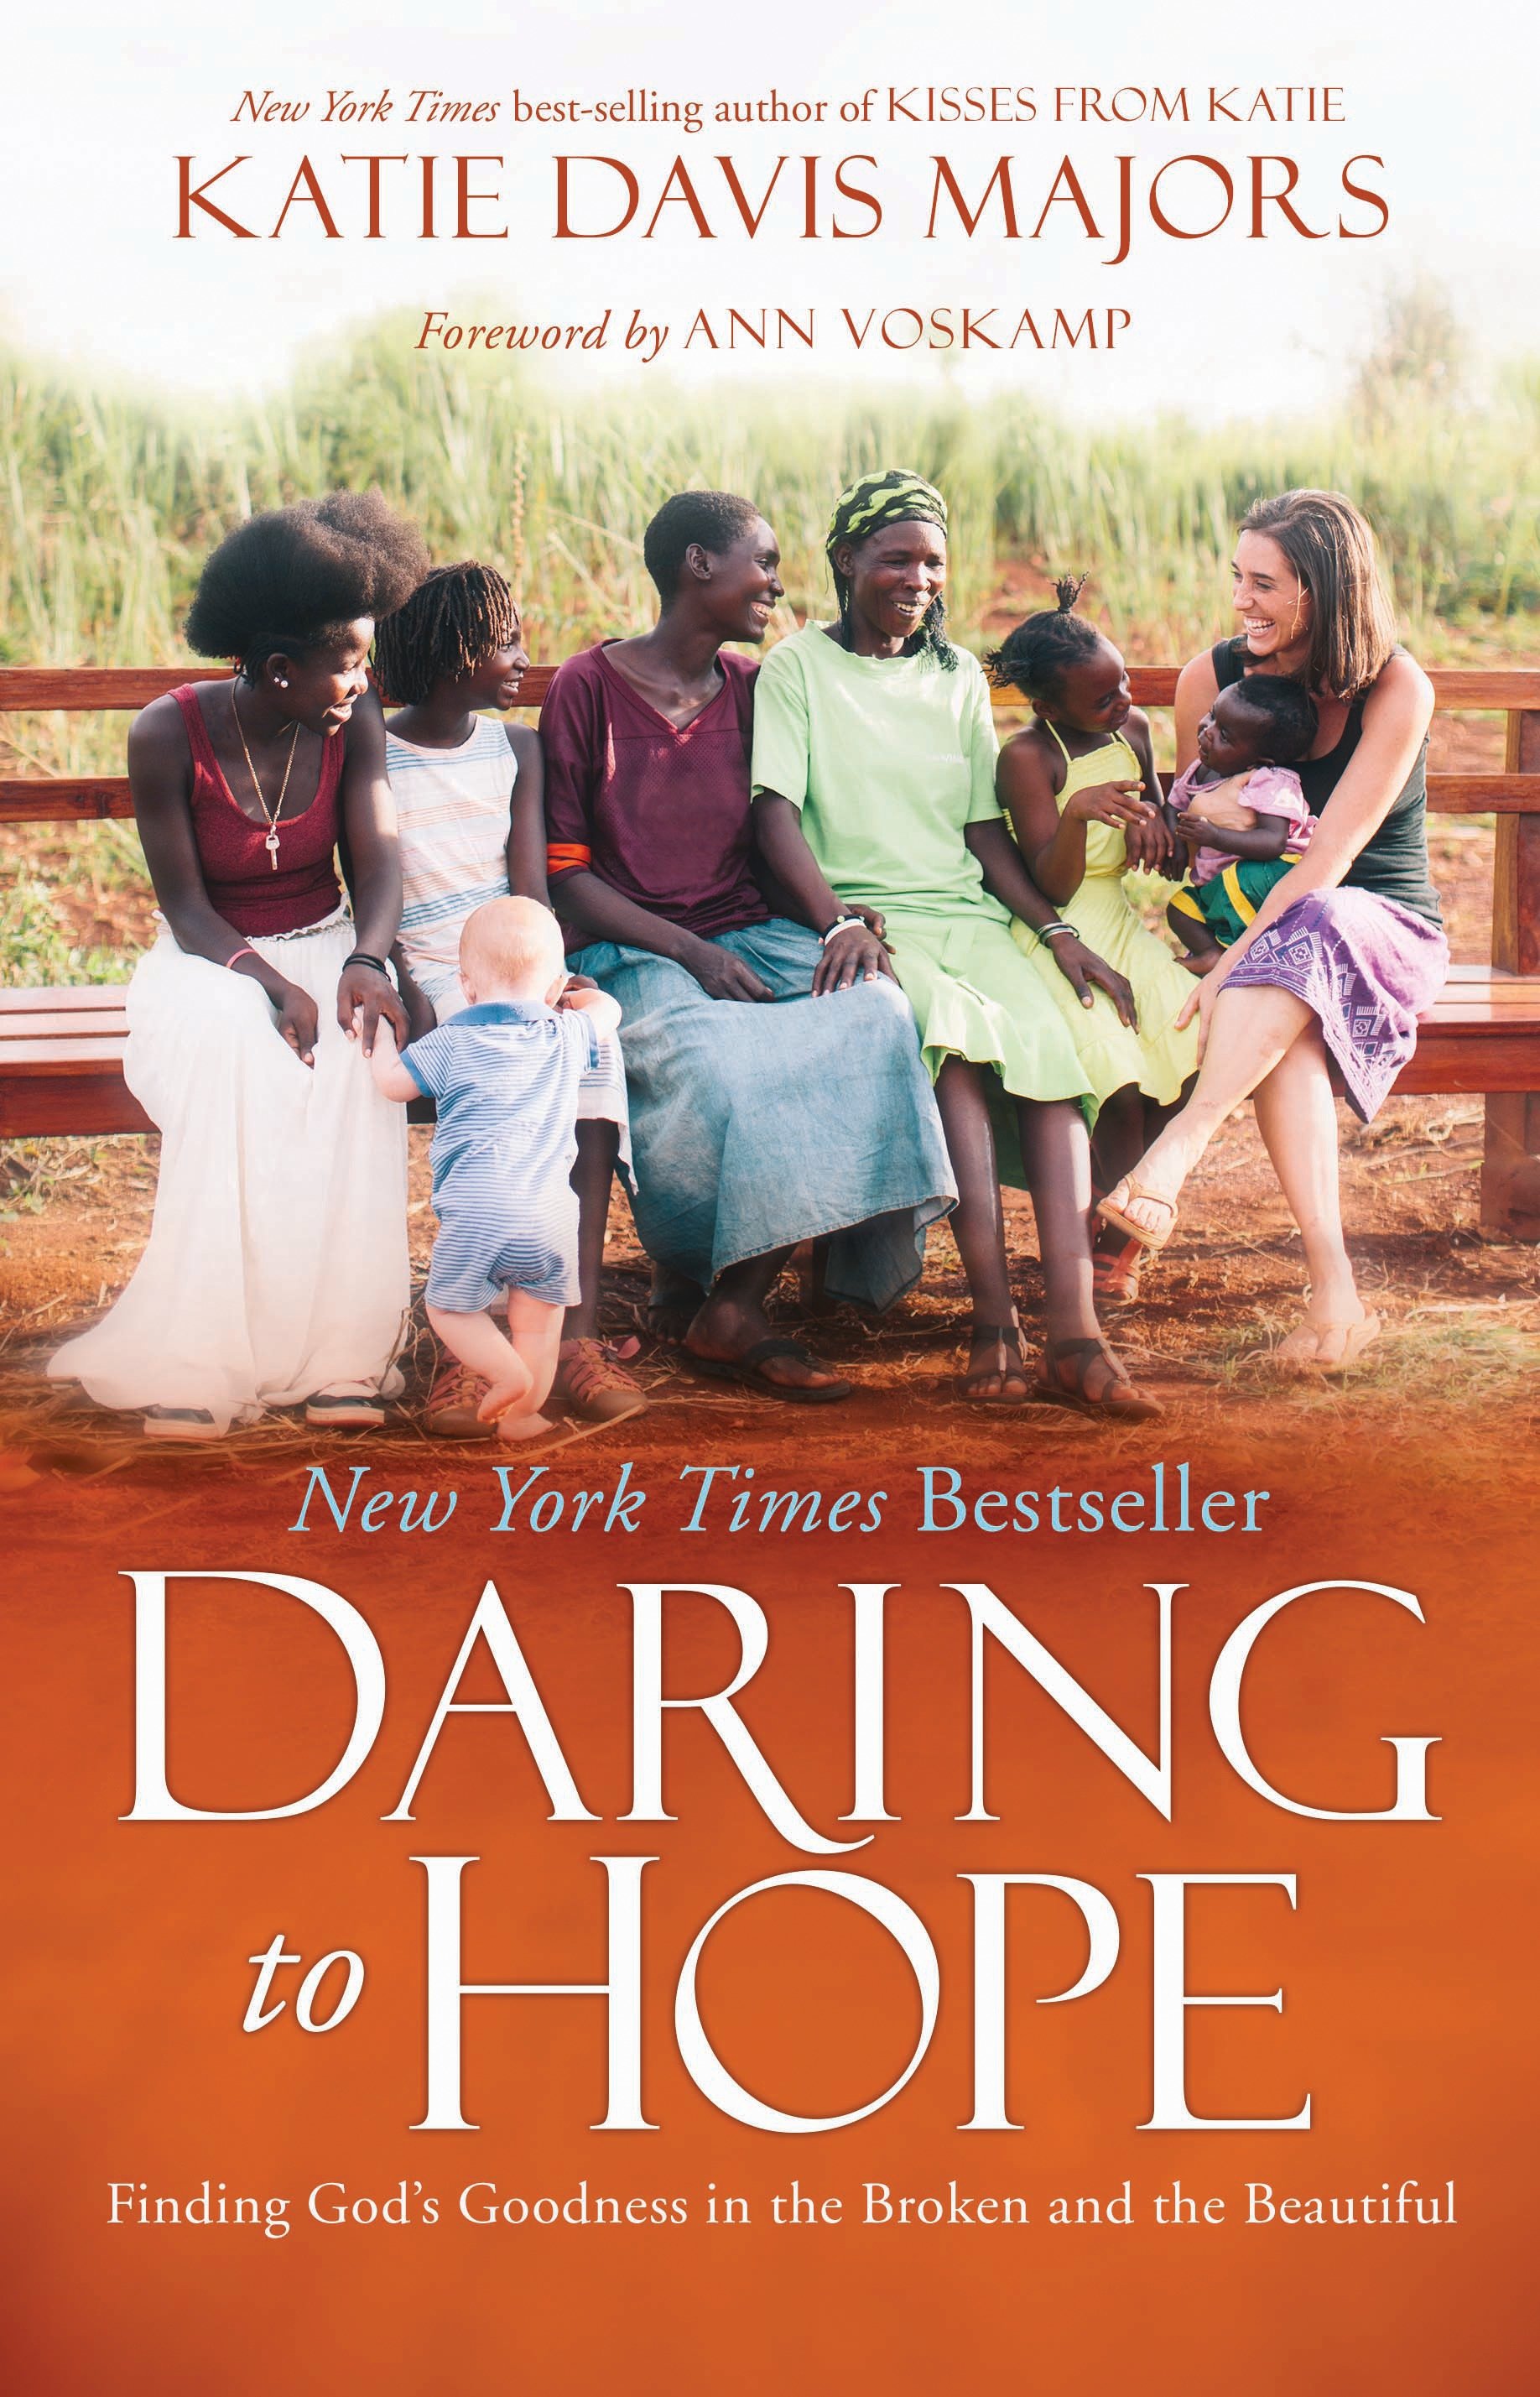 Daring to hope finding God's goodness in the broken and the beautiful cover image